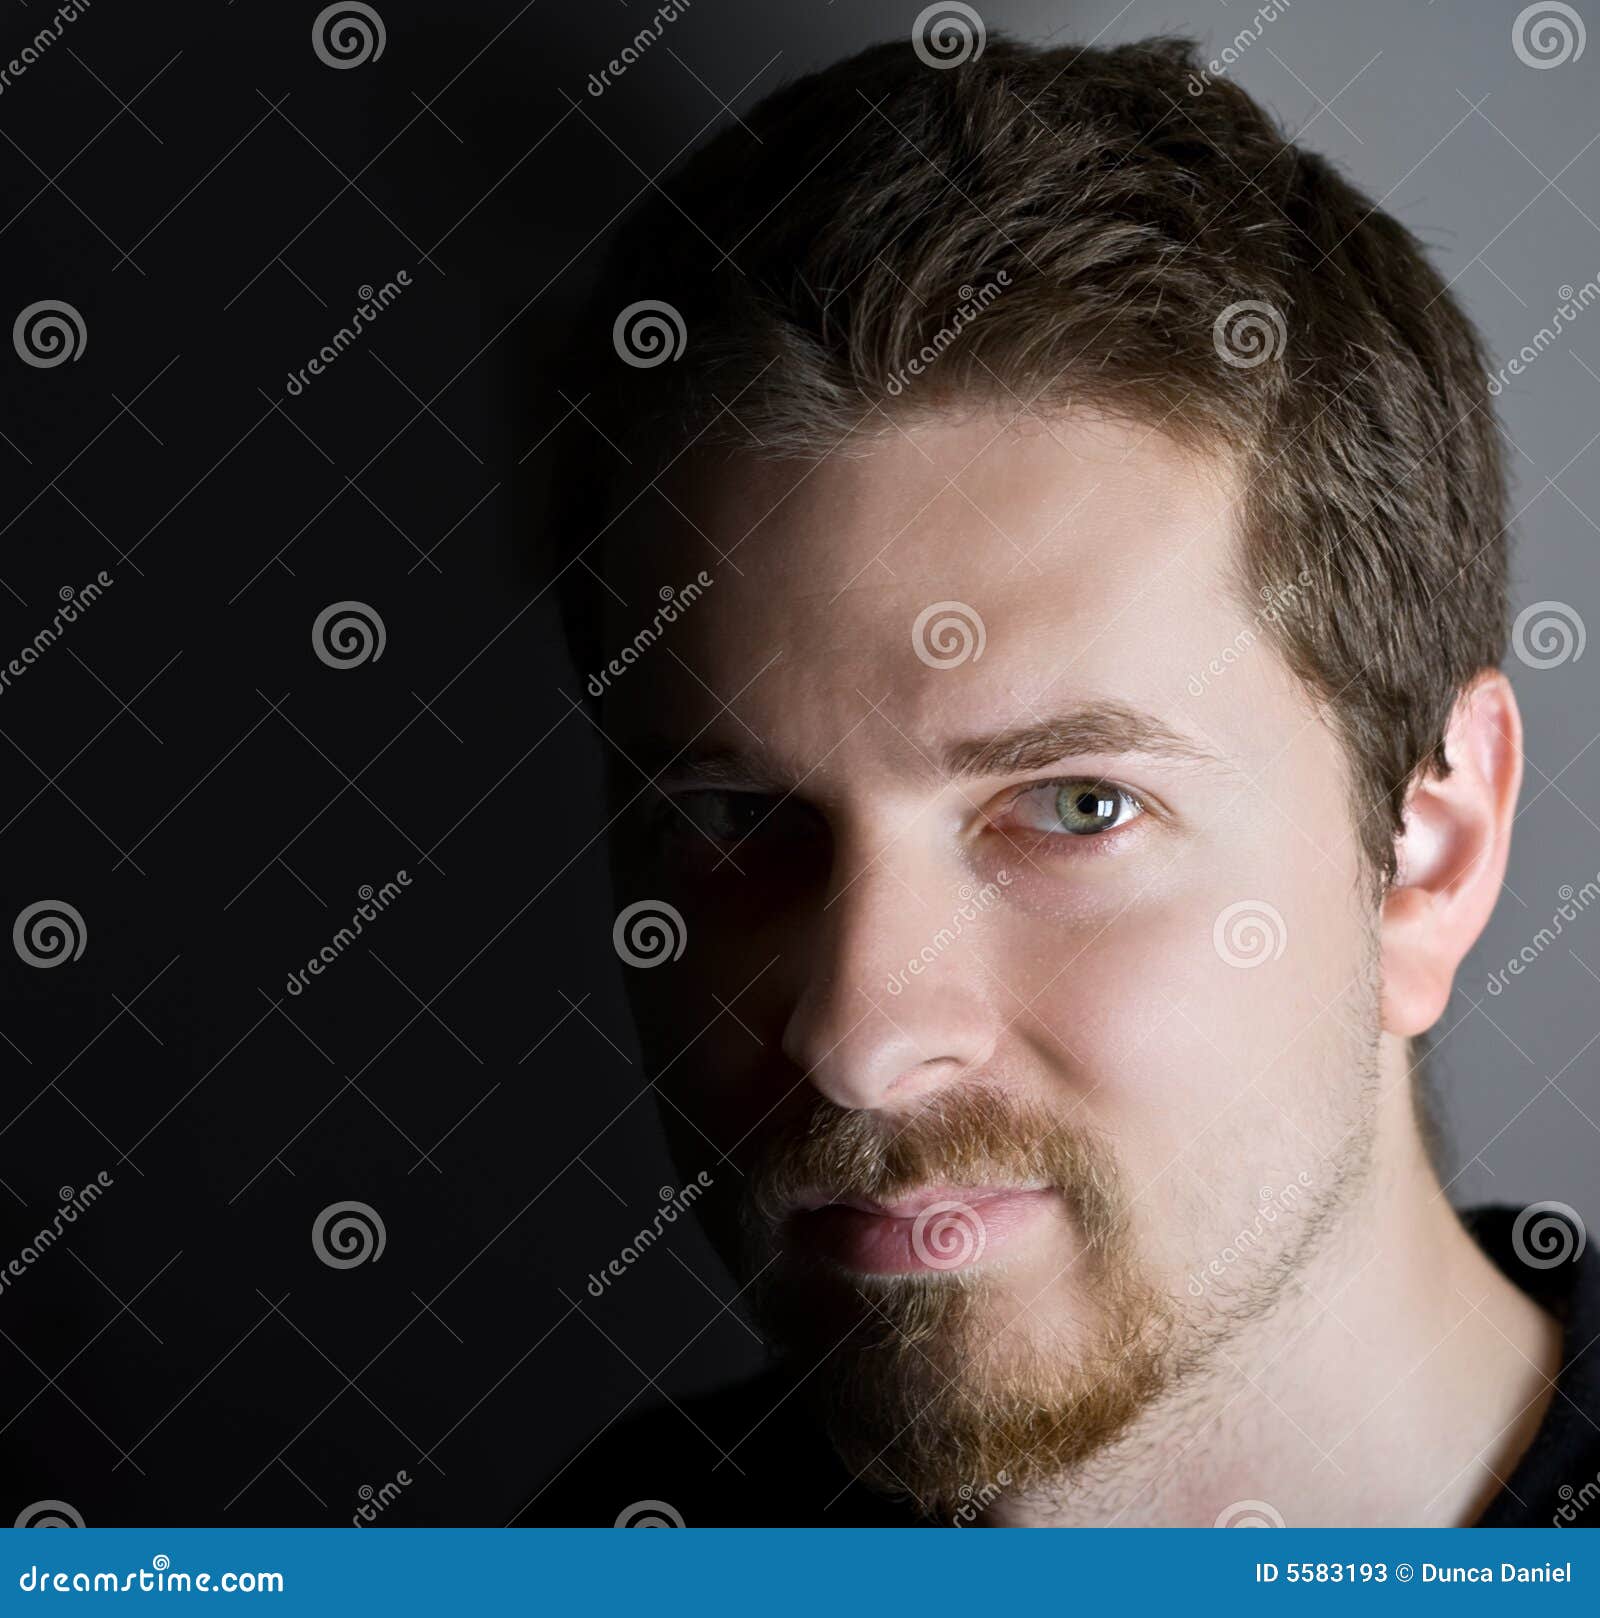 Handsome Confident Young Man Stock Image - Image of confident ...